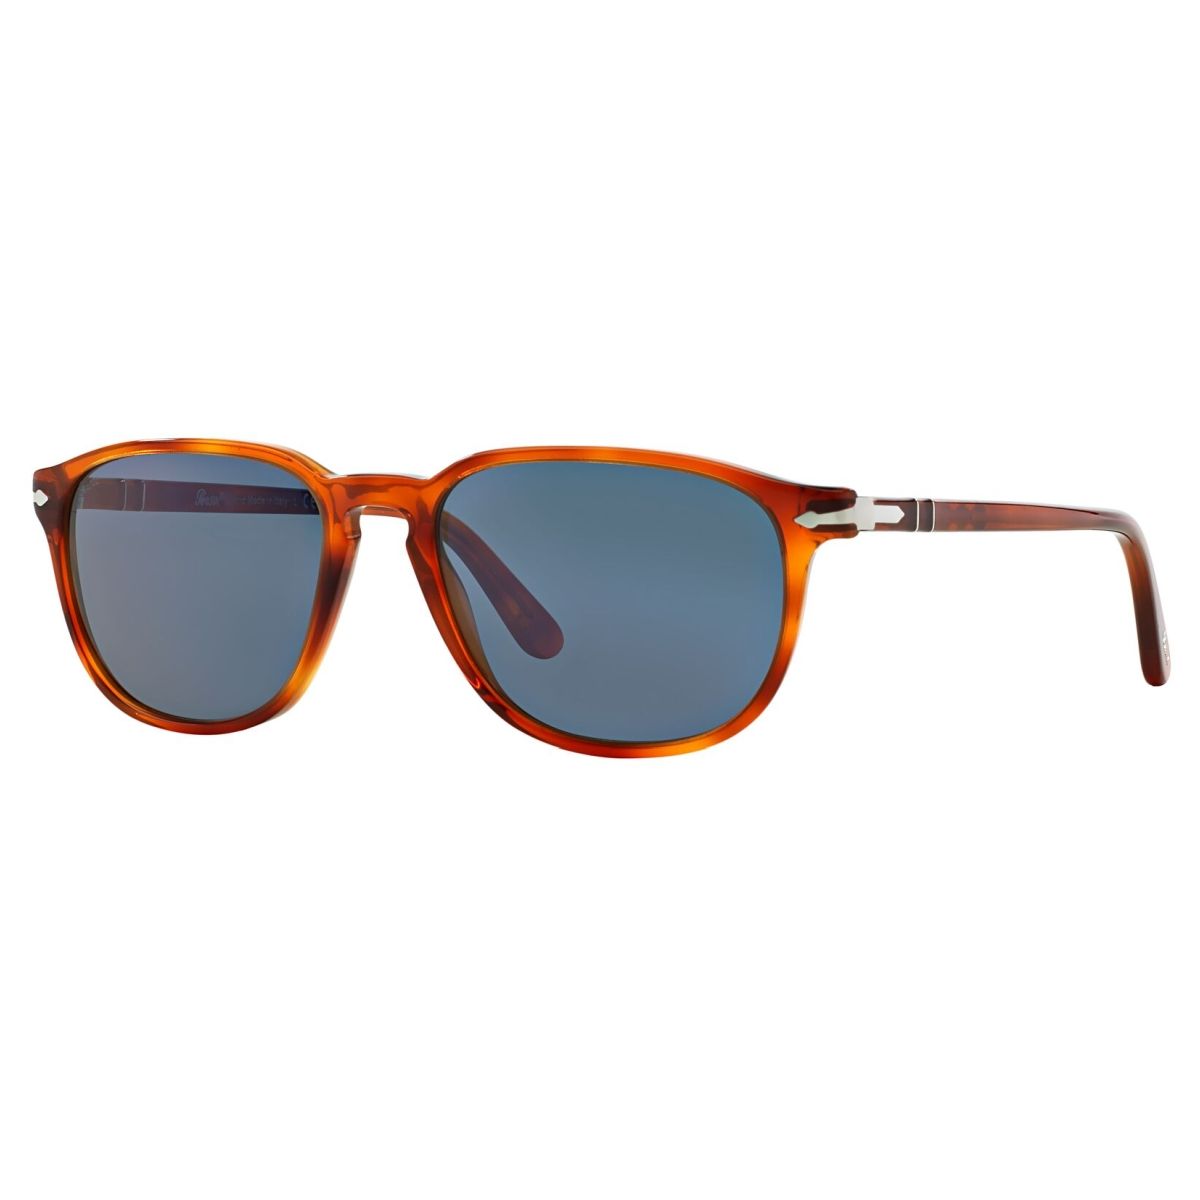 PERSOL 3019S/96/56/55